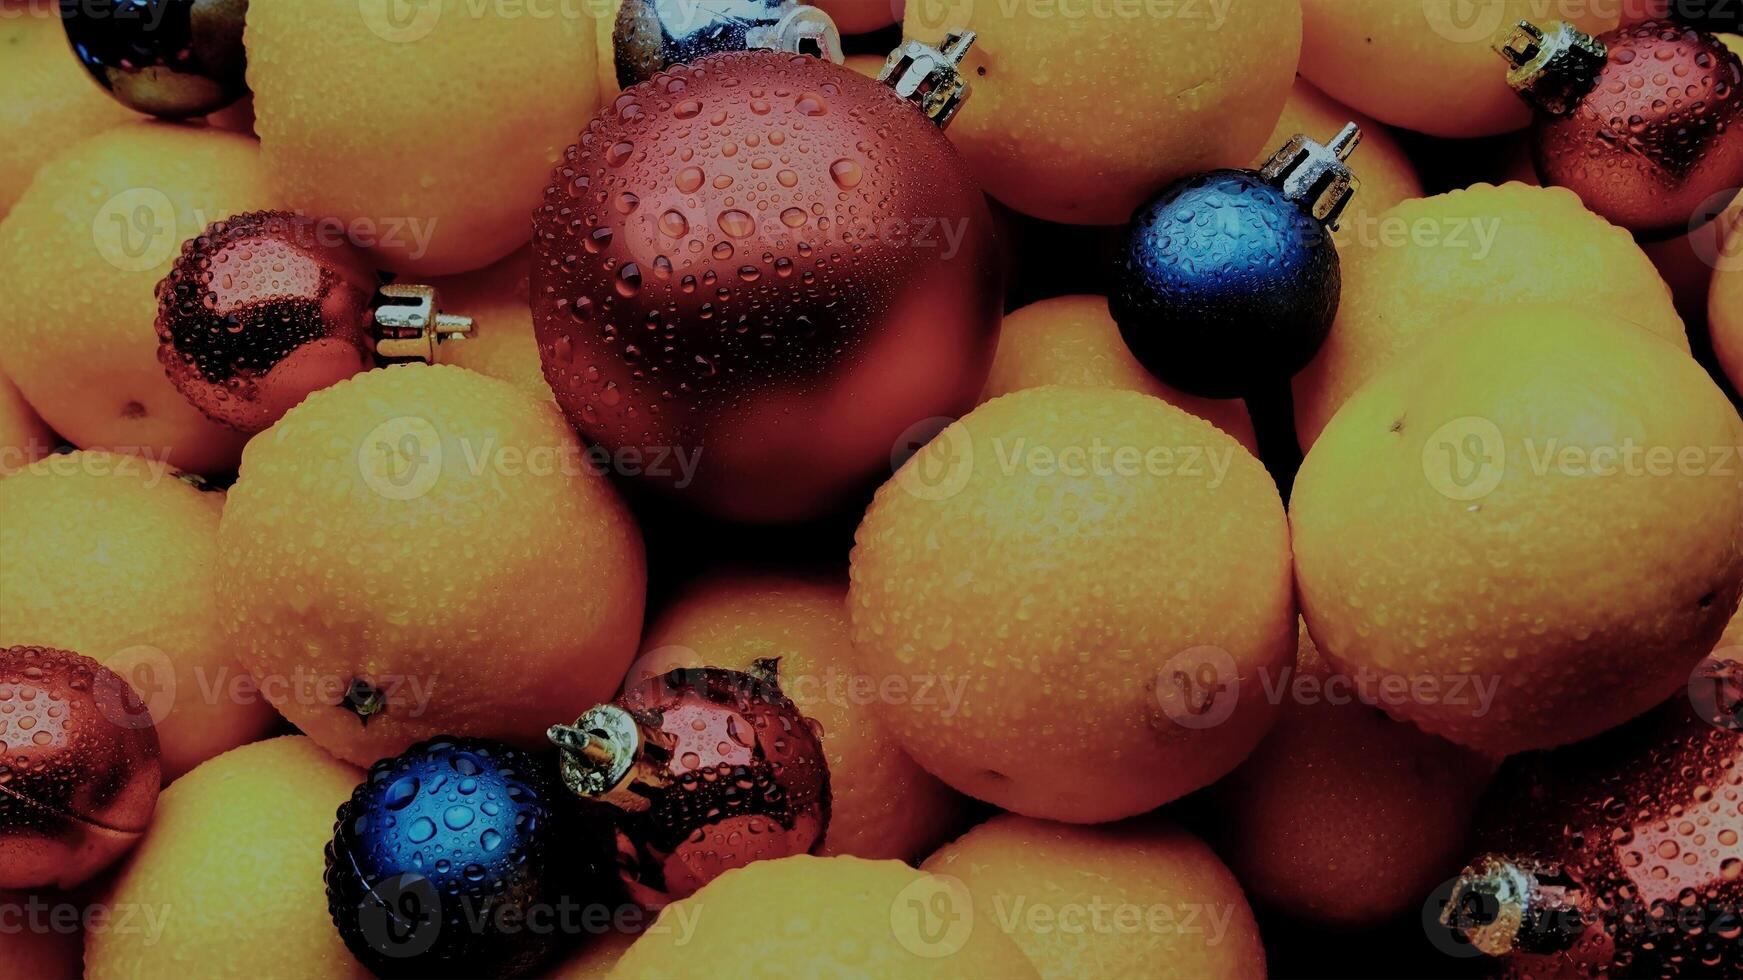 3d rendering Christmas. New Year's toys and fruits. tangerines and Christmas tree balls photo